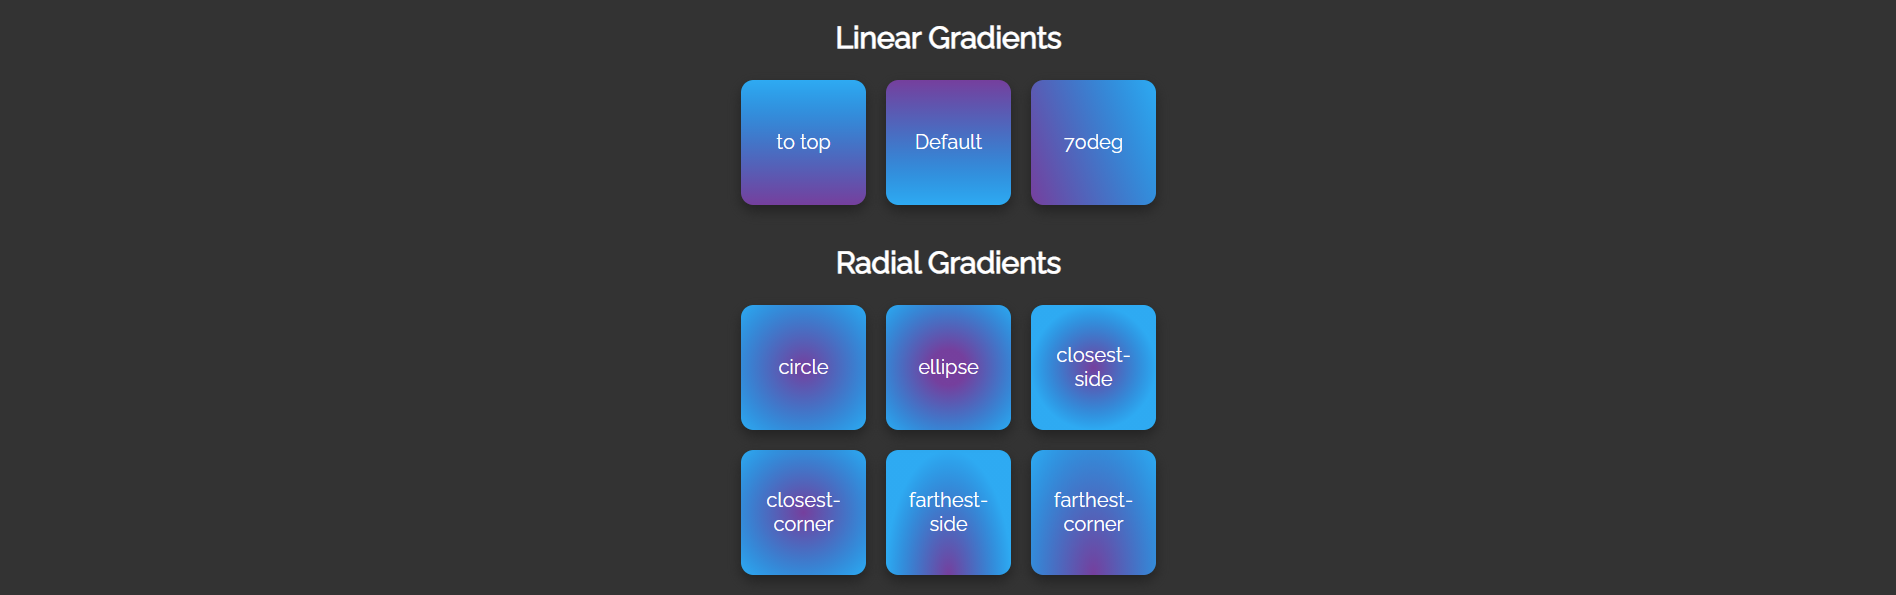 CSS Linear Gradients